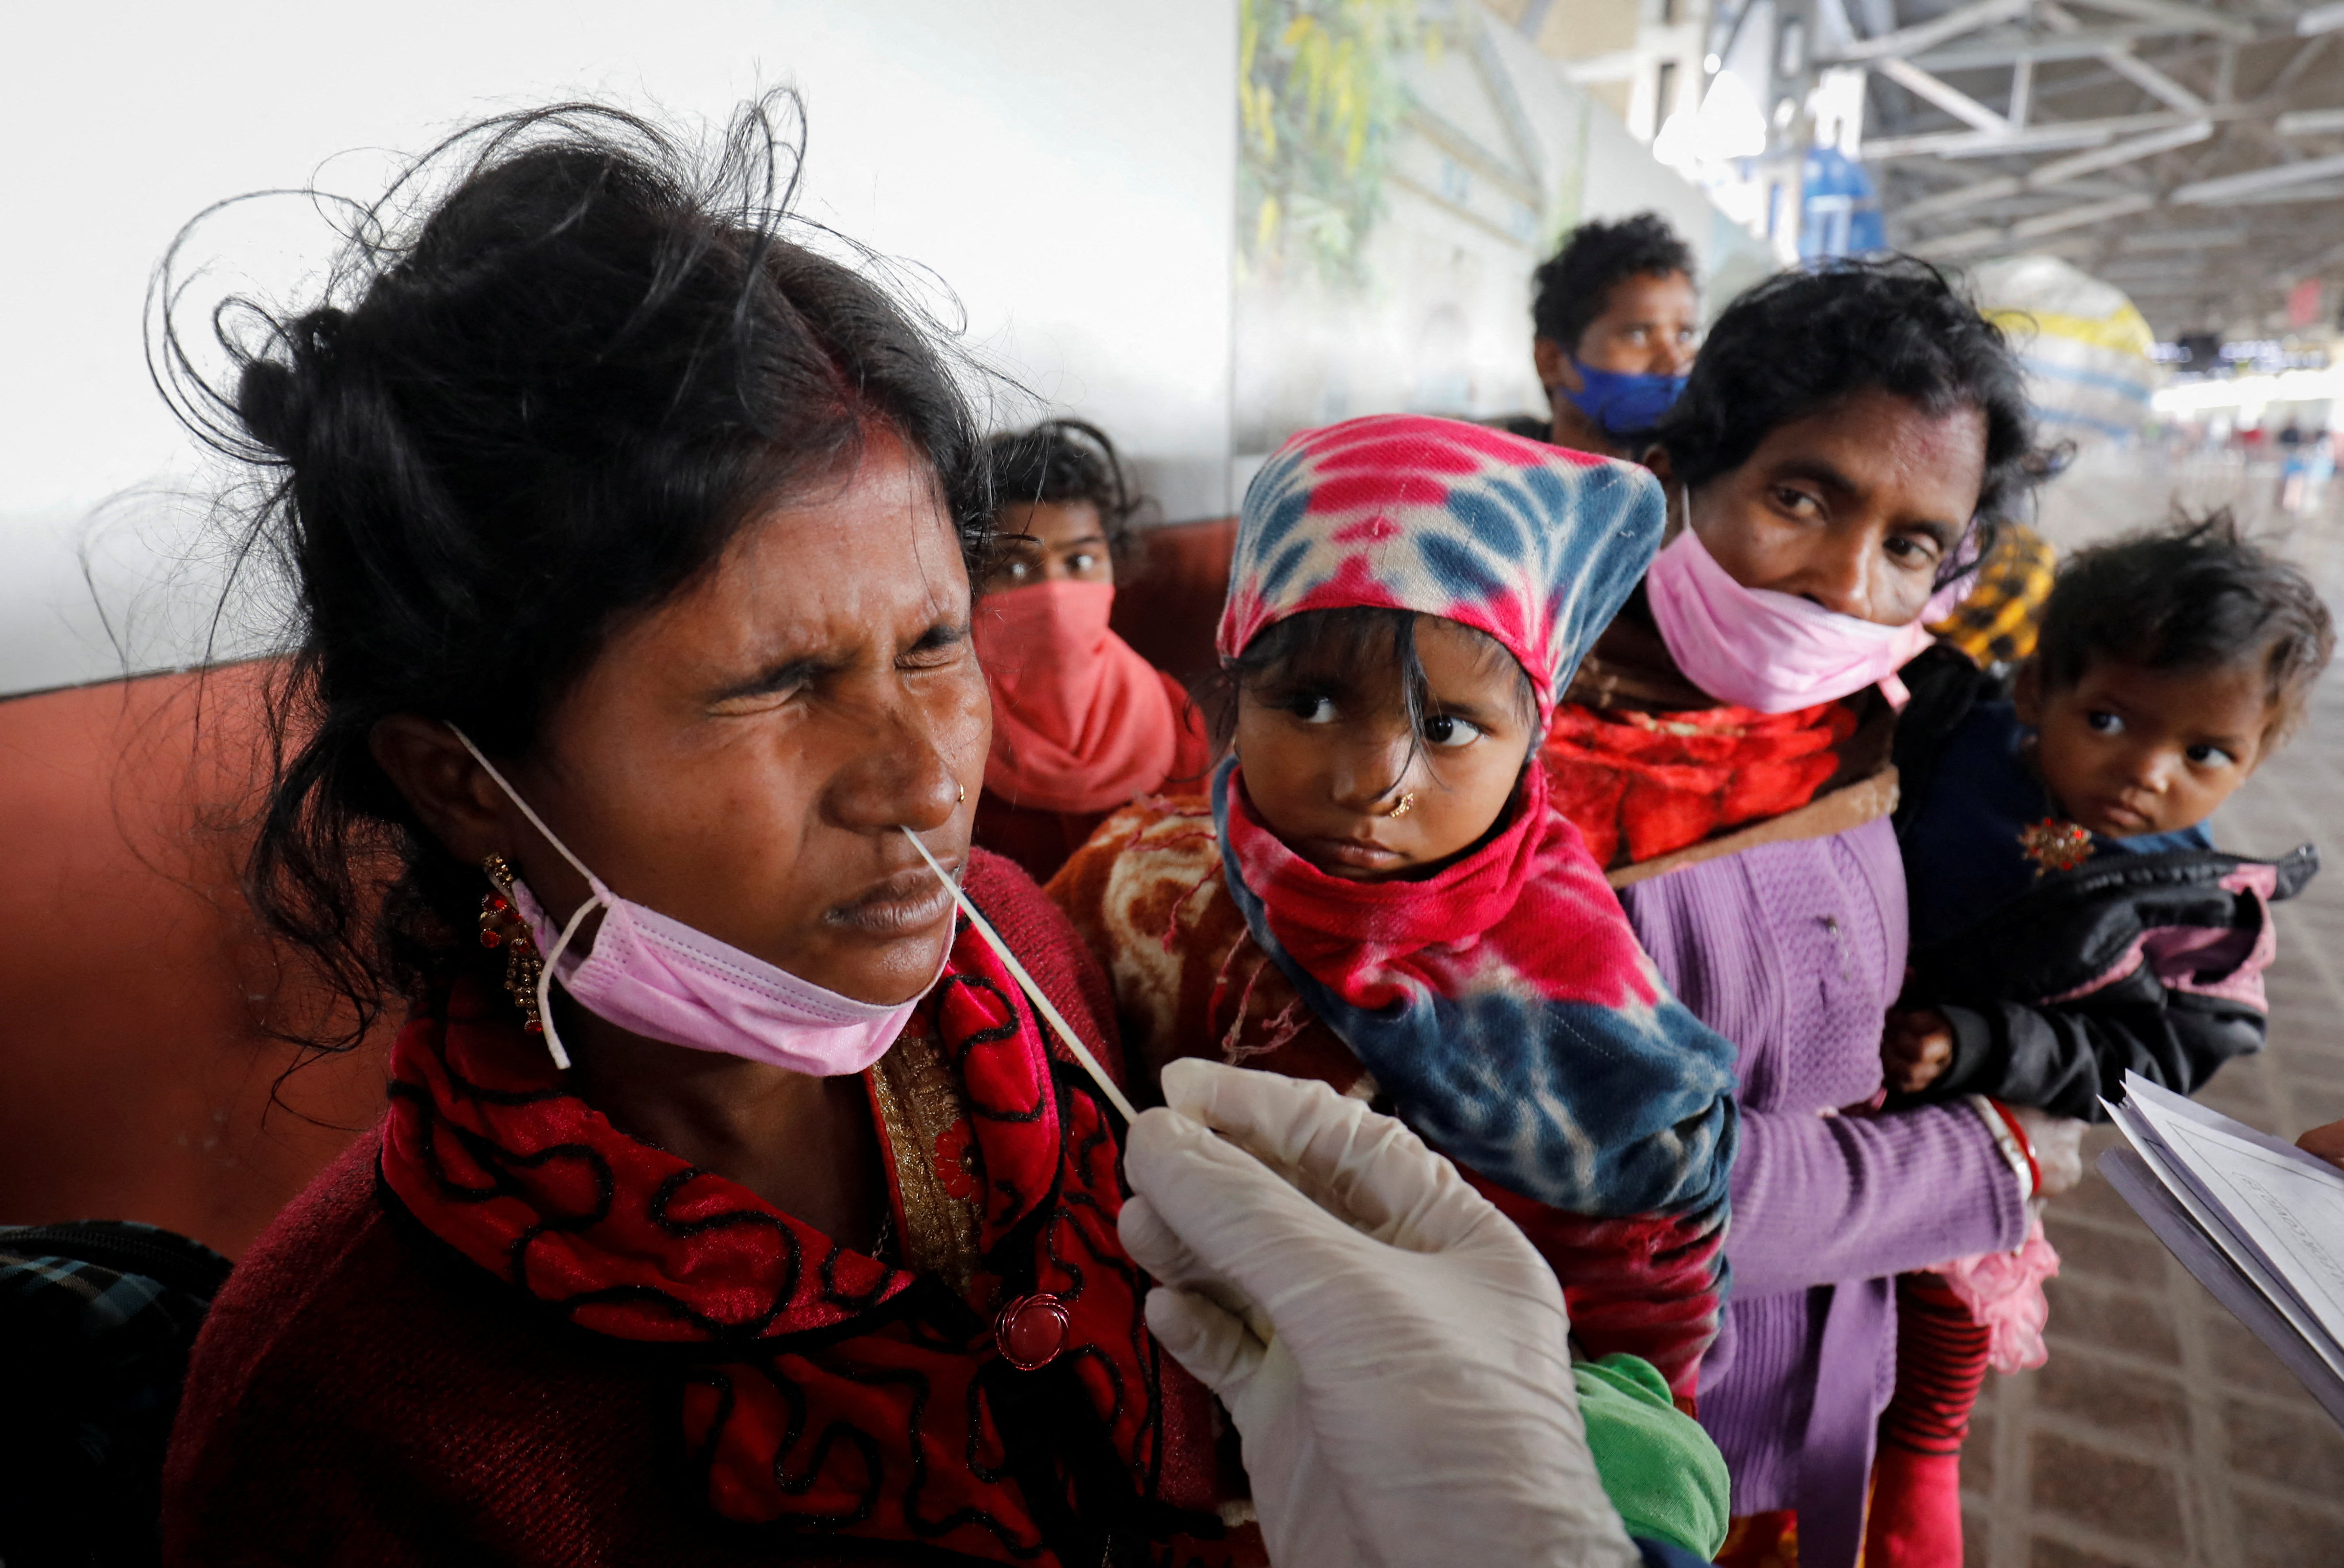 A woman reacts as a healthcare worker collects a swab sample from her to test for the coronavirus disease (COVID-19) at a railway station in Ahmedabad